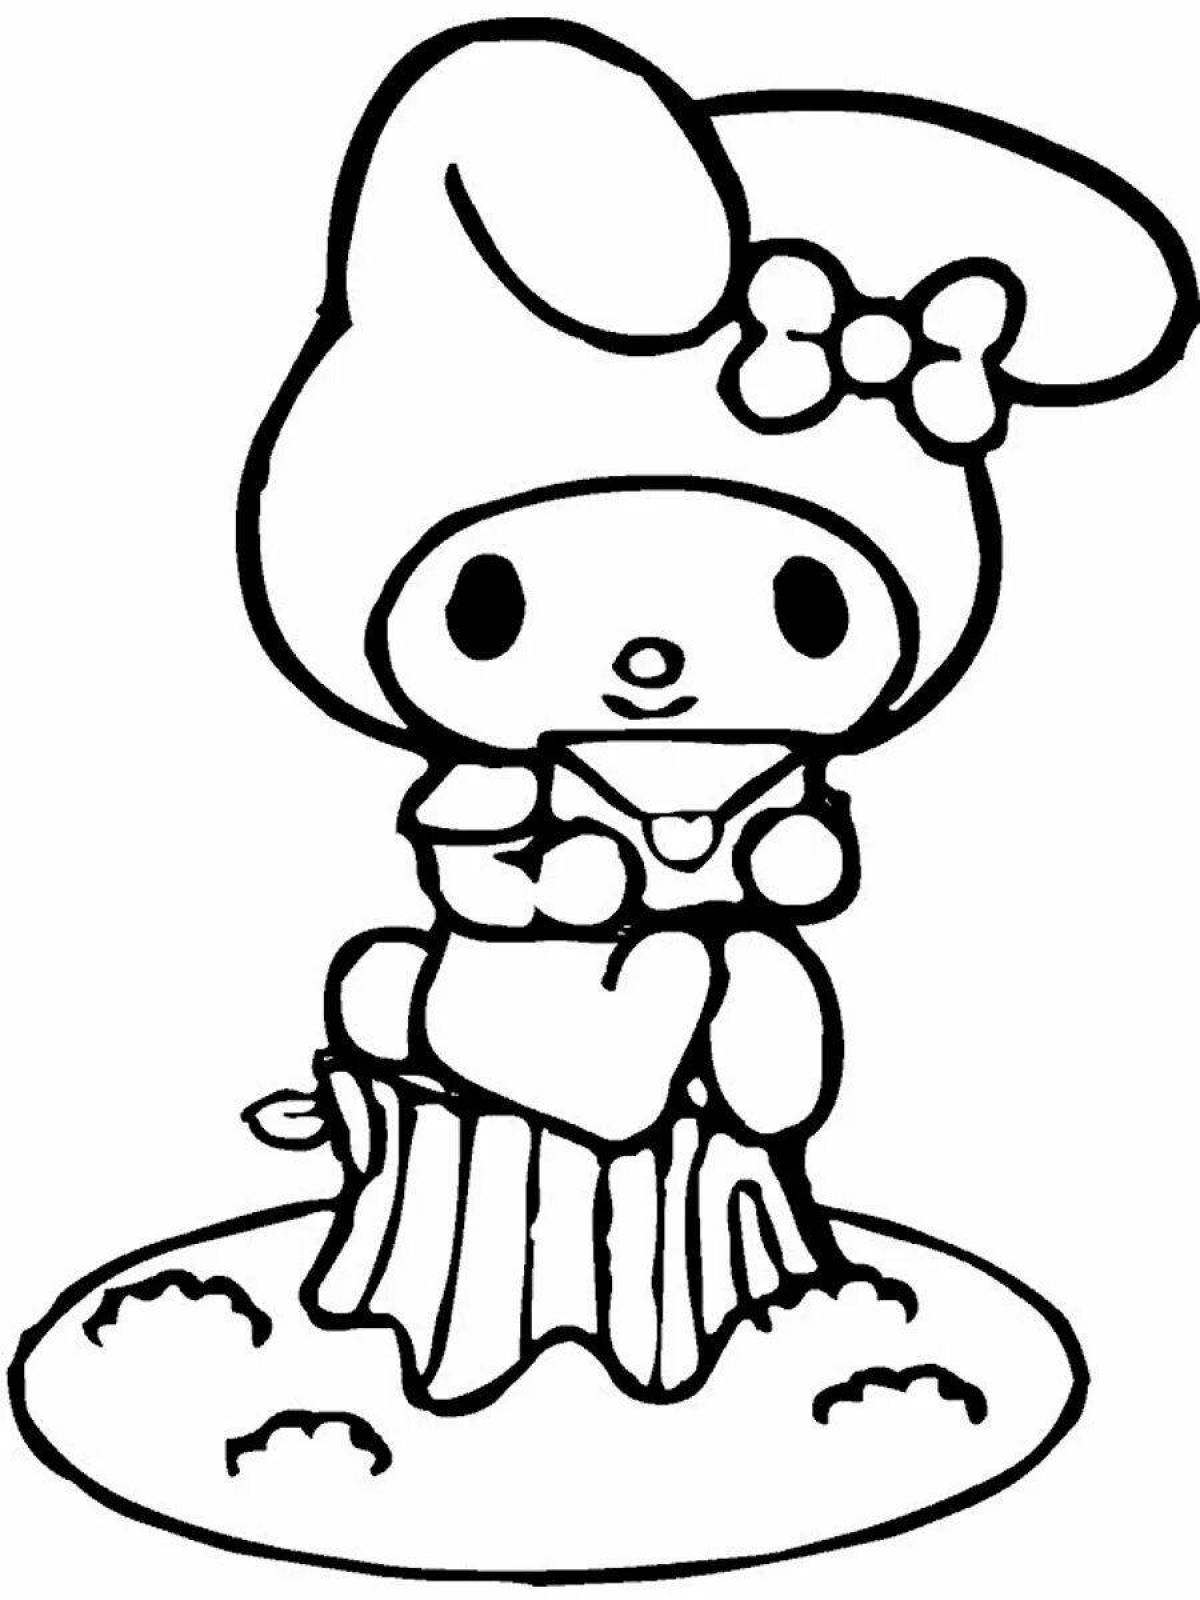 Milady from hello kitty #9